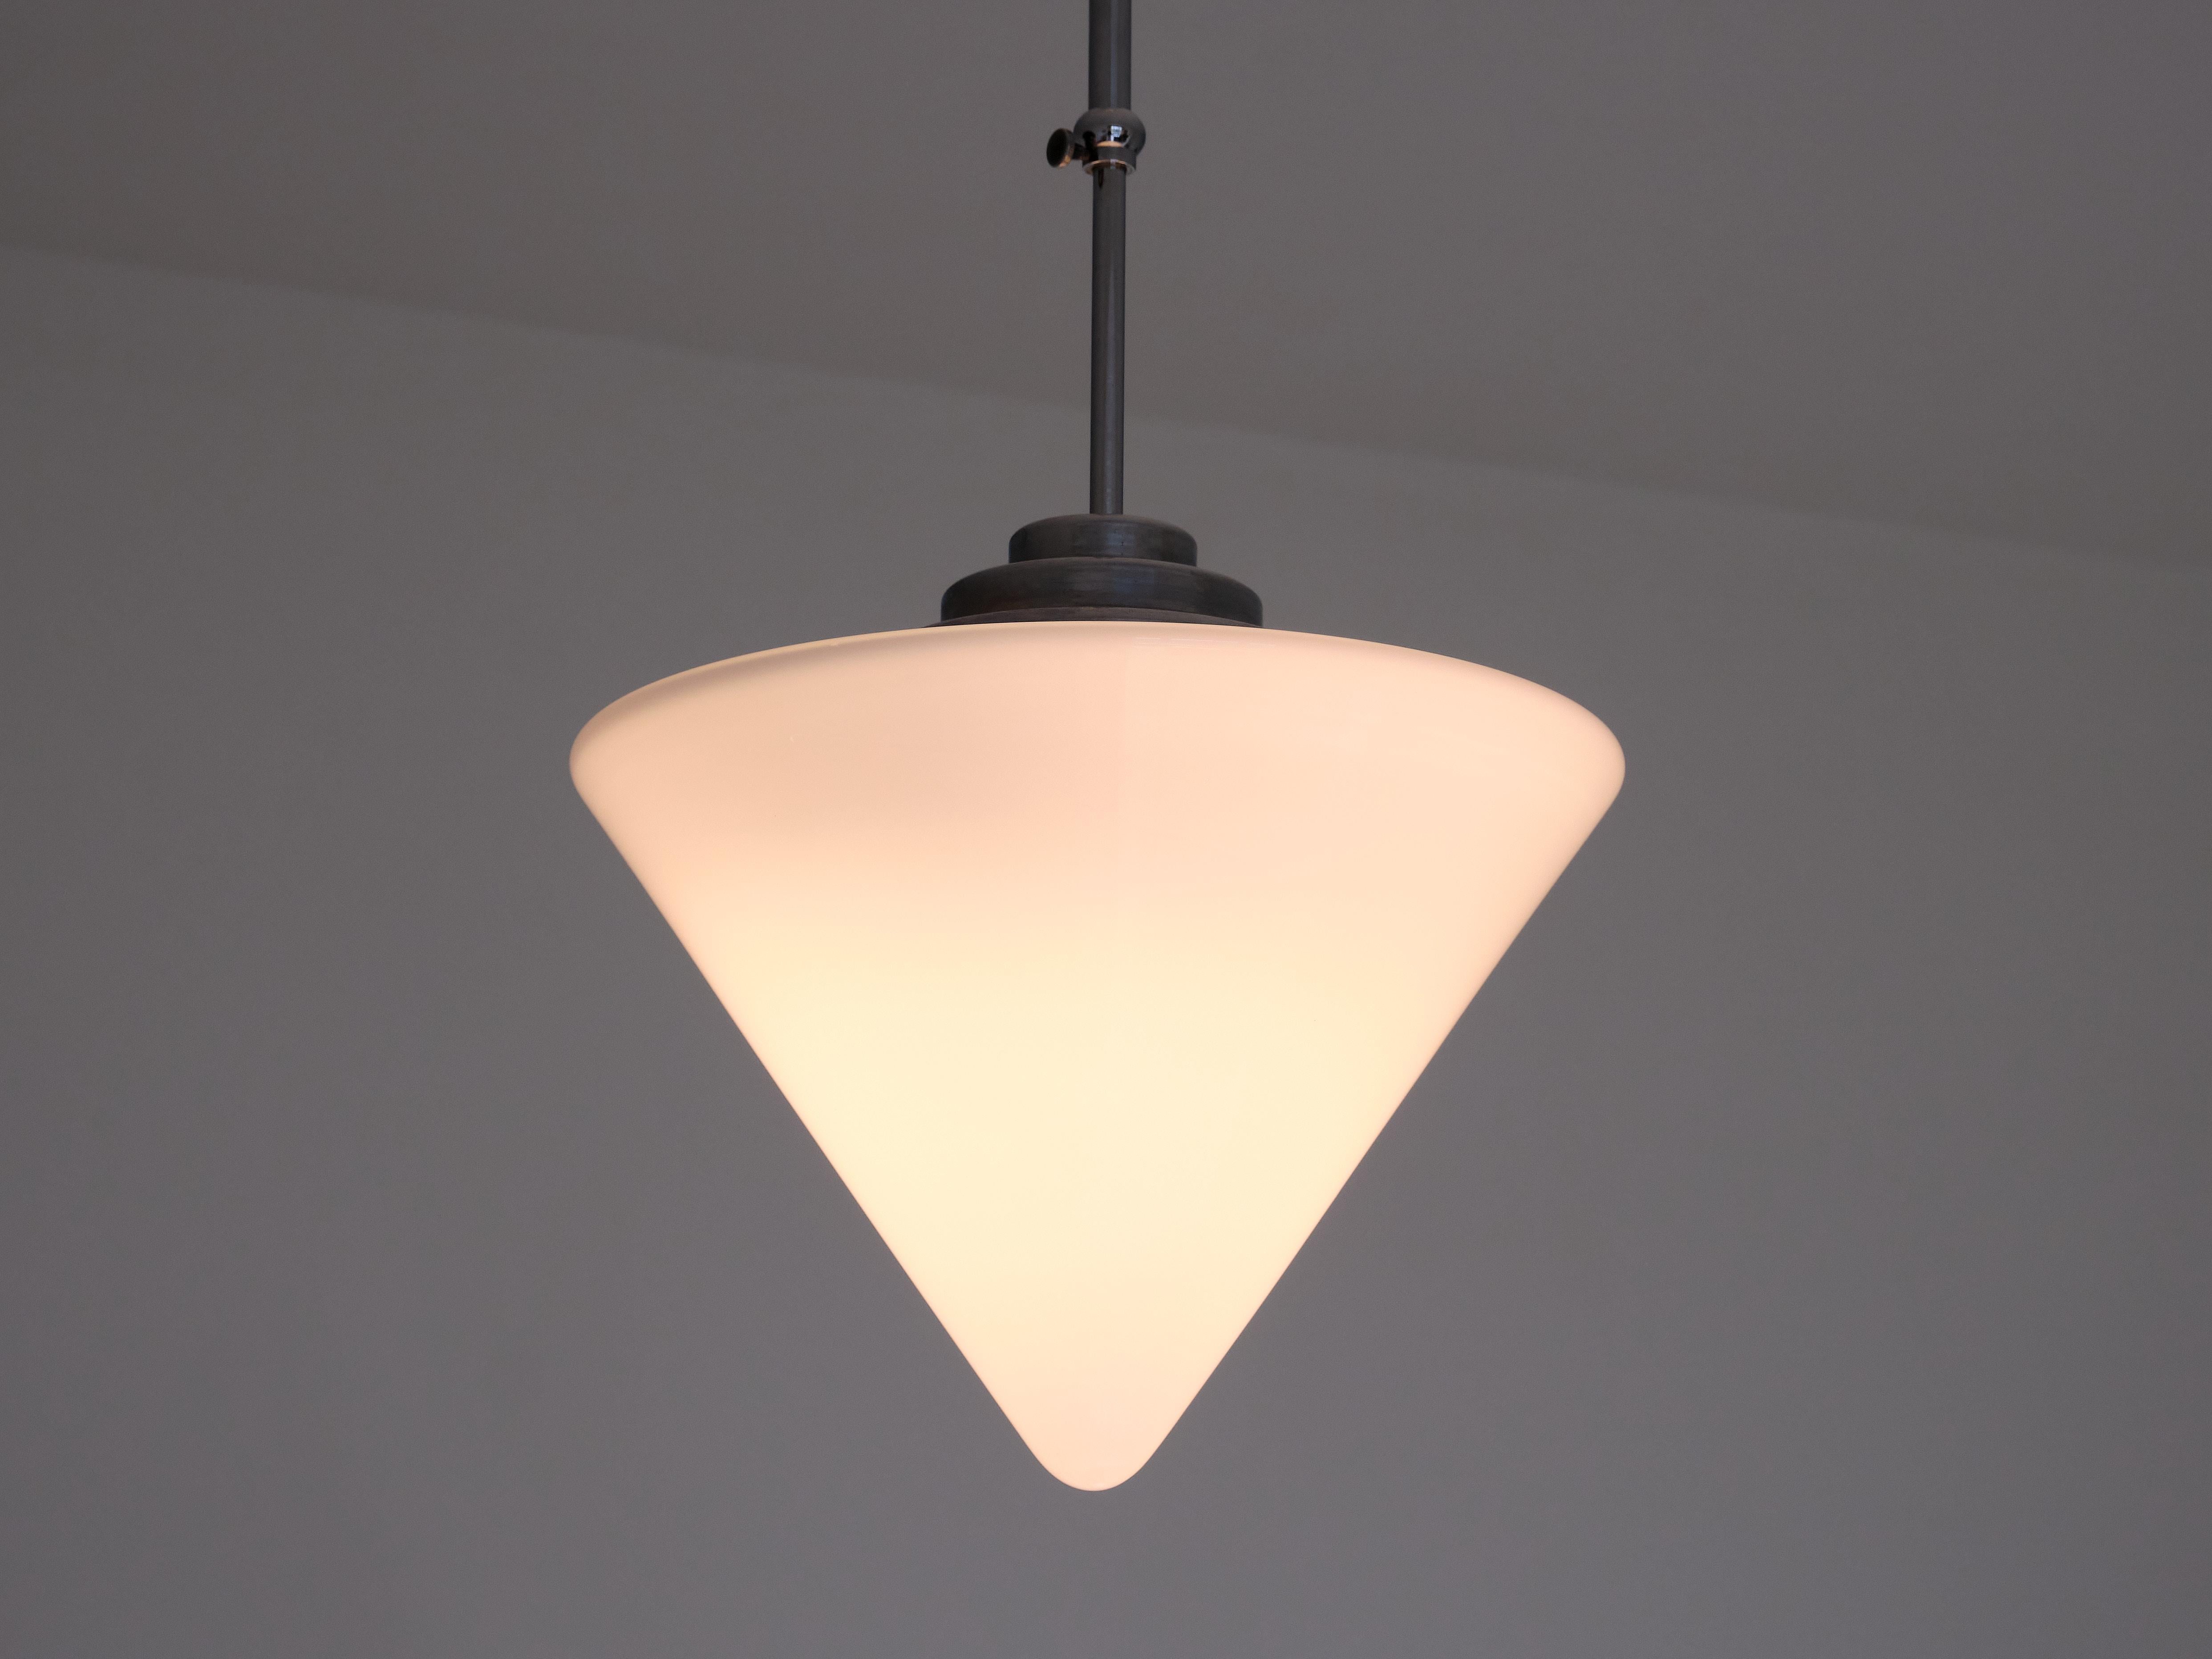 Gispen Cone Shaped Pendant Light with Adjustable Drop Height, Netherlands, 1950s In Good Condition For Sale In The Hague, NL